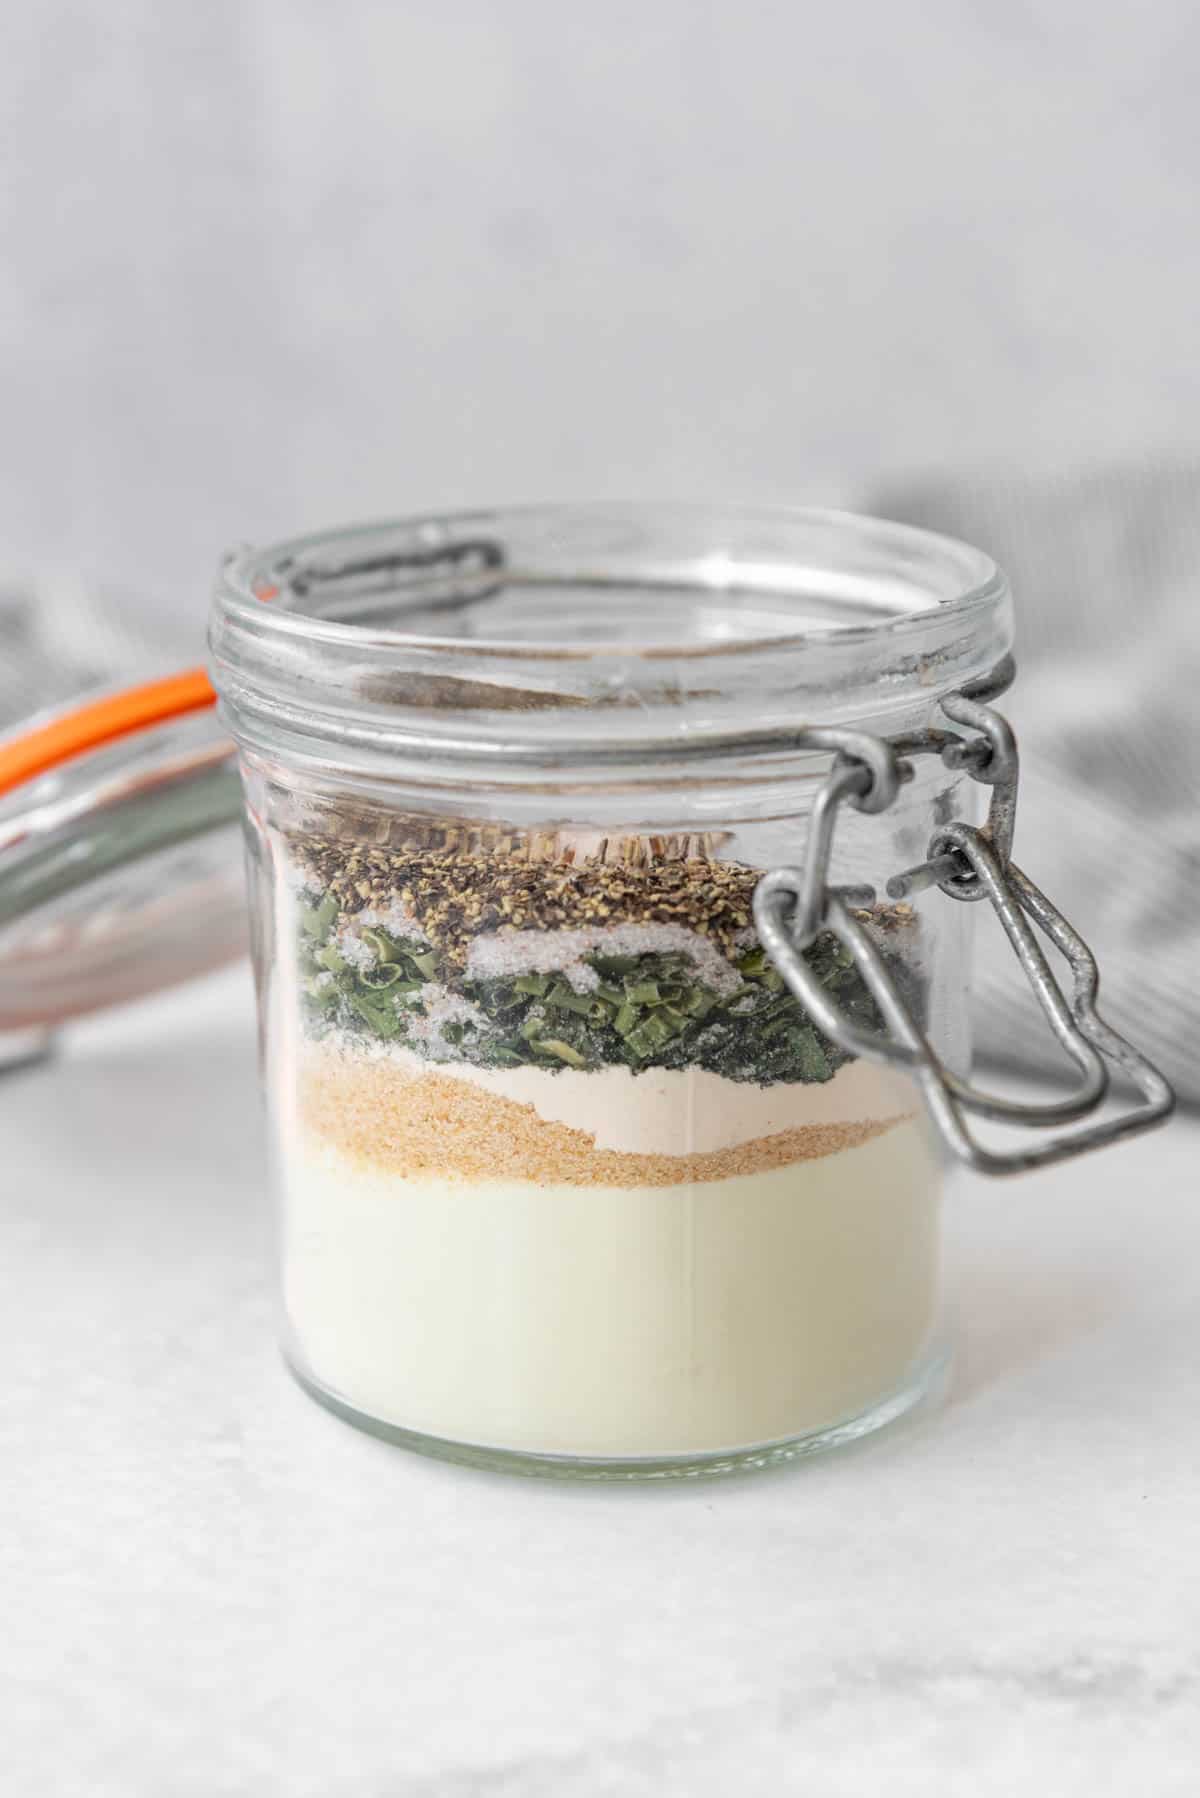 Layered ingredients for making homemade ranch seasoning in a glass jar.